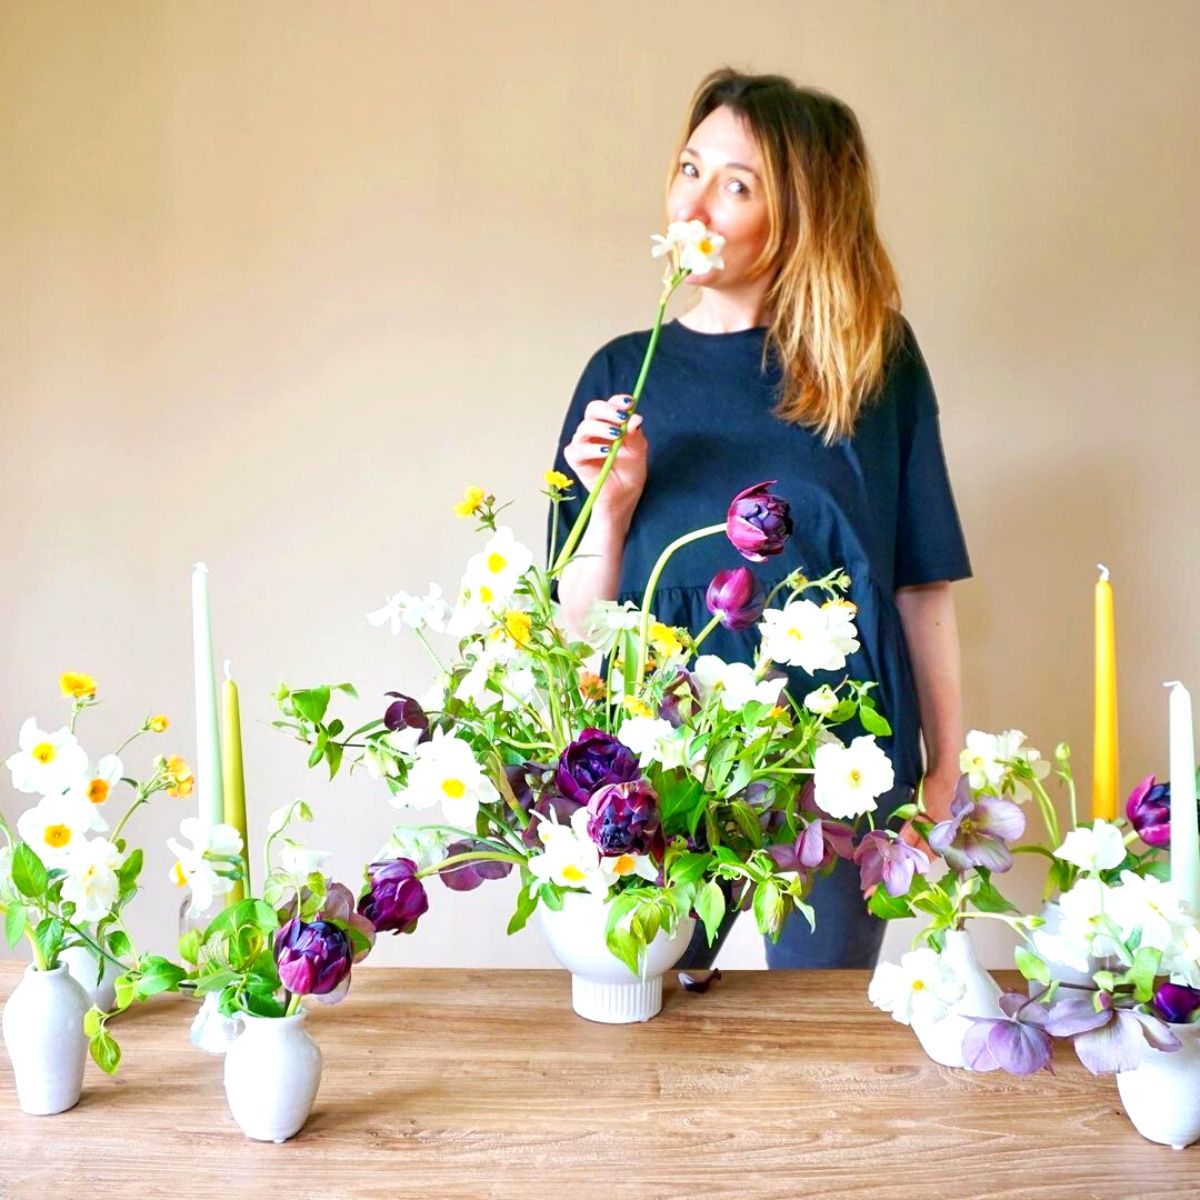 Rachel Husband adores working with flowers